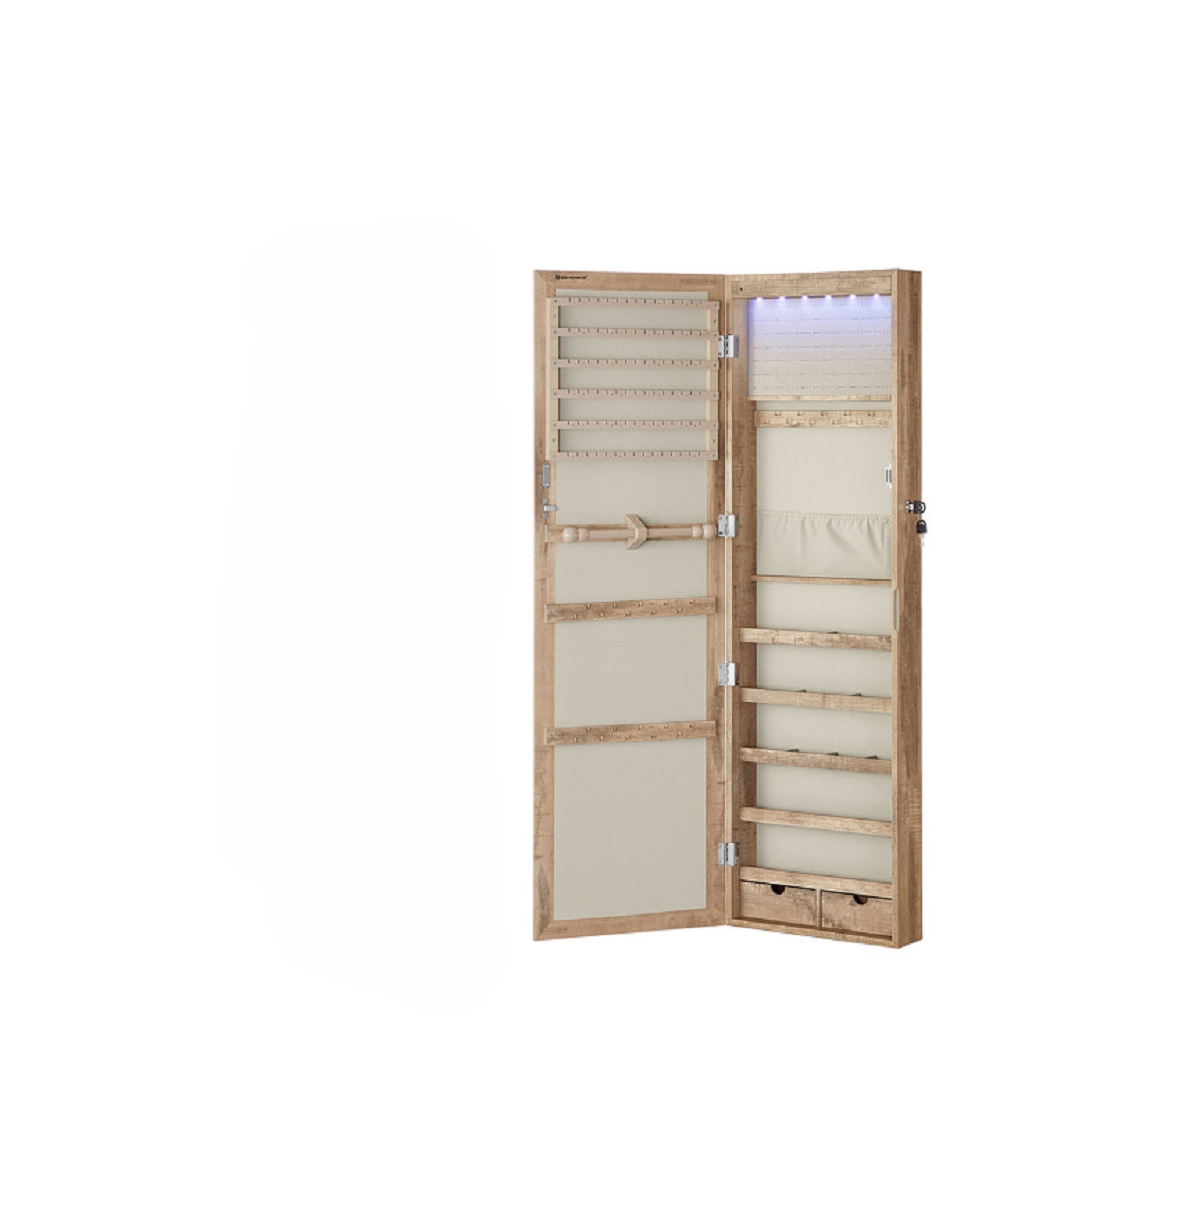 6 LEDs Mirror Jewelry Cabinet, Lockable Wall/Door Mounted Jewelry Armoire Organizer with Mirror - Toasted oak